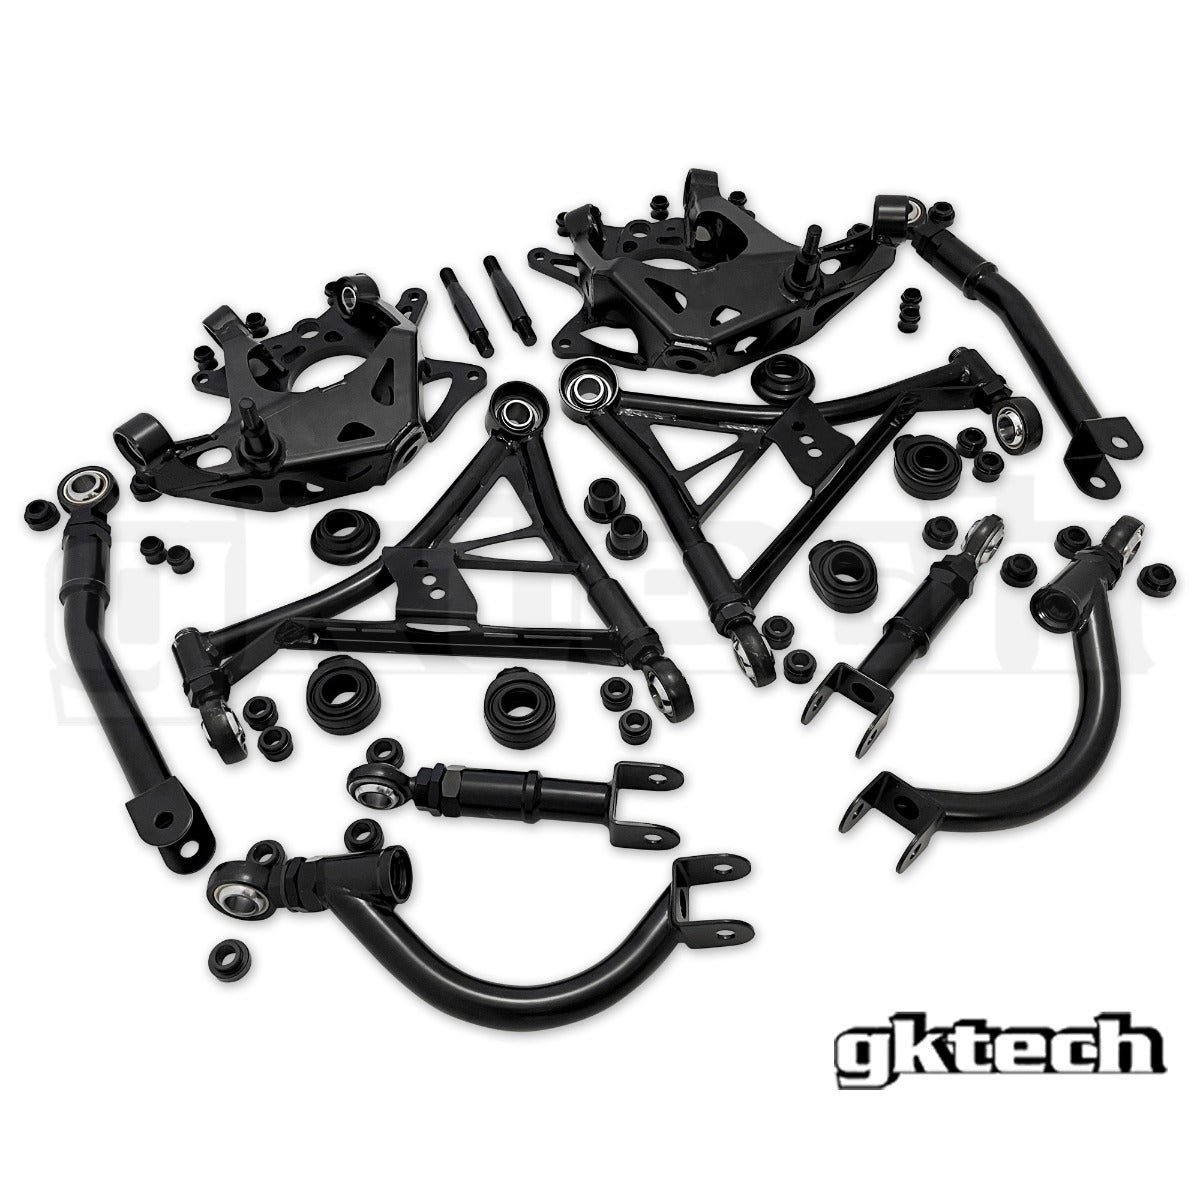 S/R chassis rear suspension package - 20% off